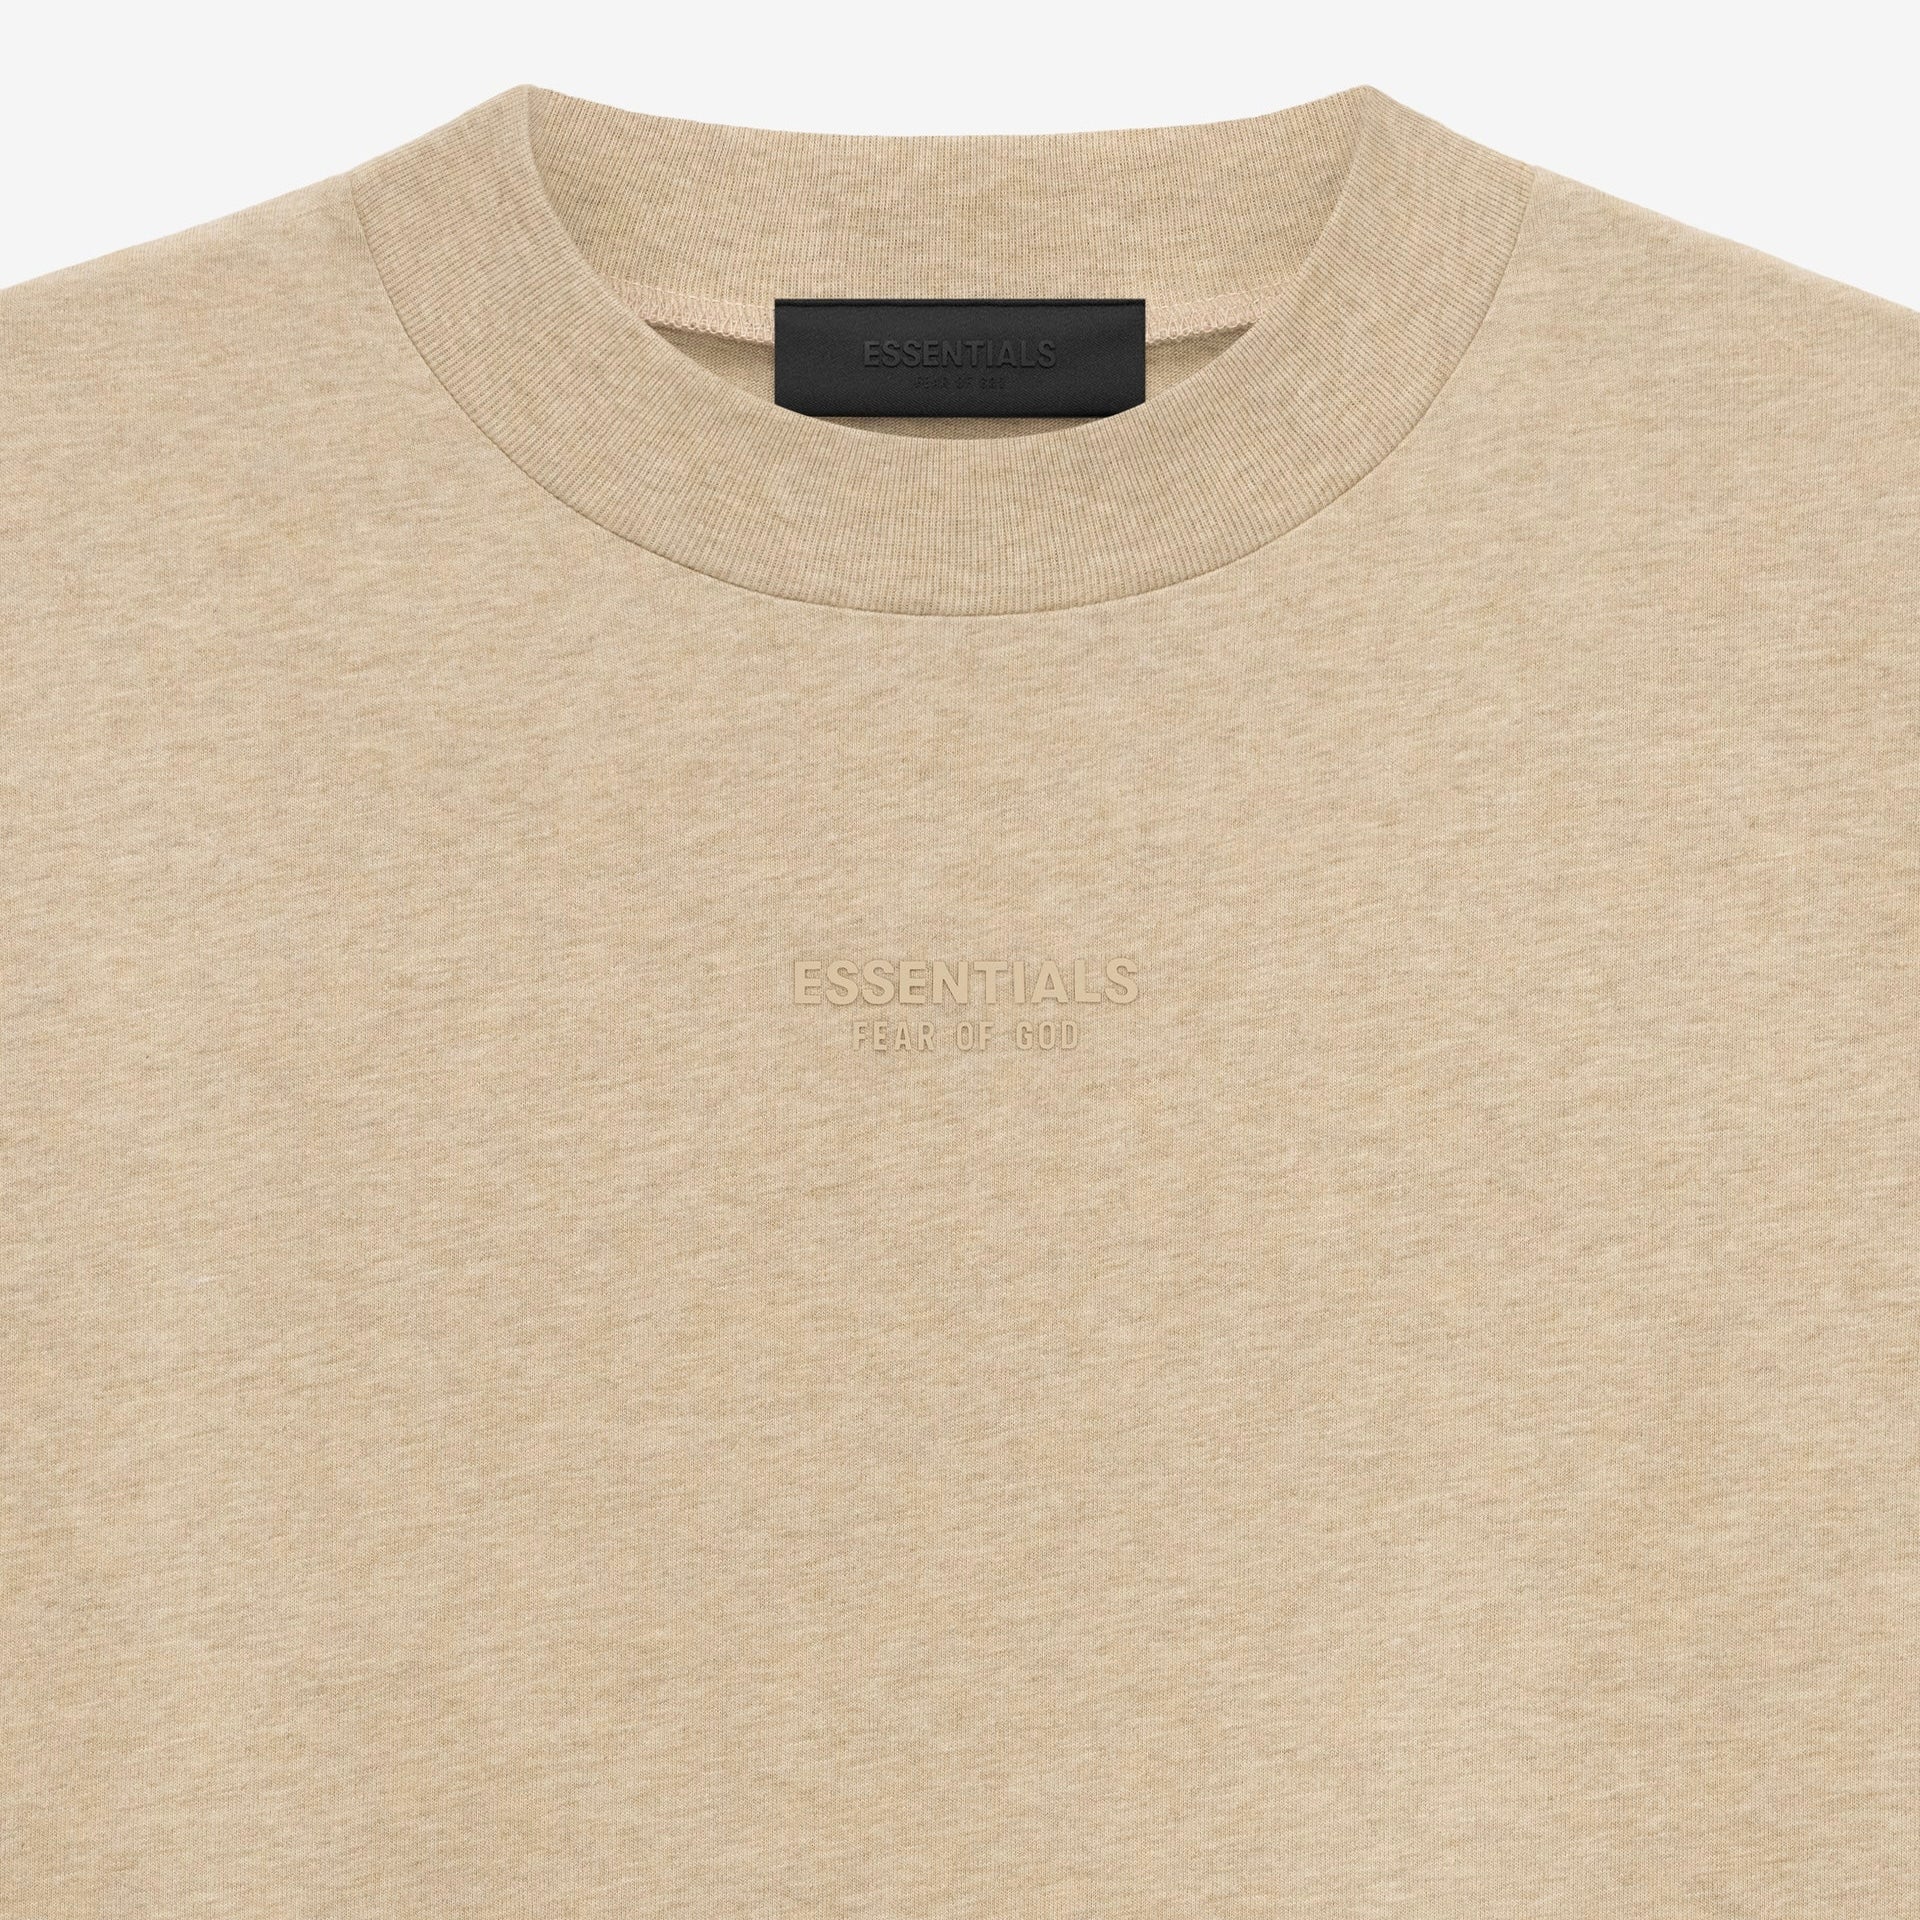 Fear of God Essentials Gold Heather T-Shirt Close View